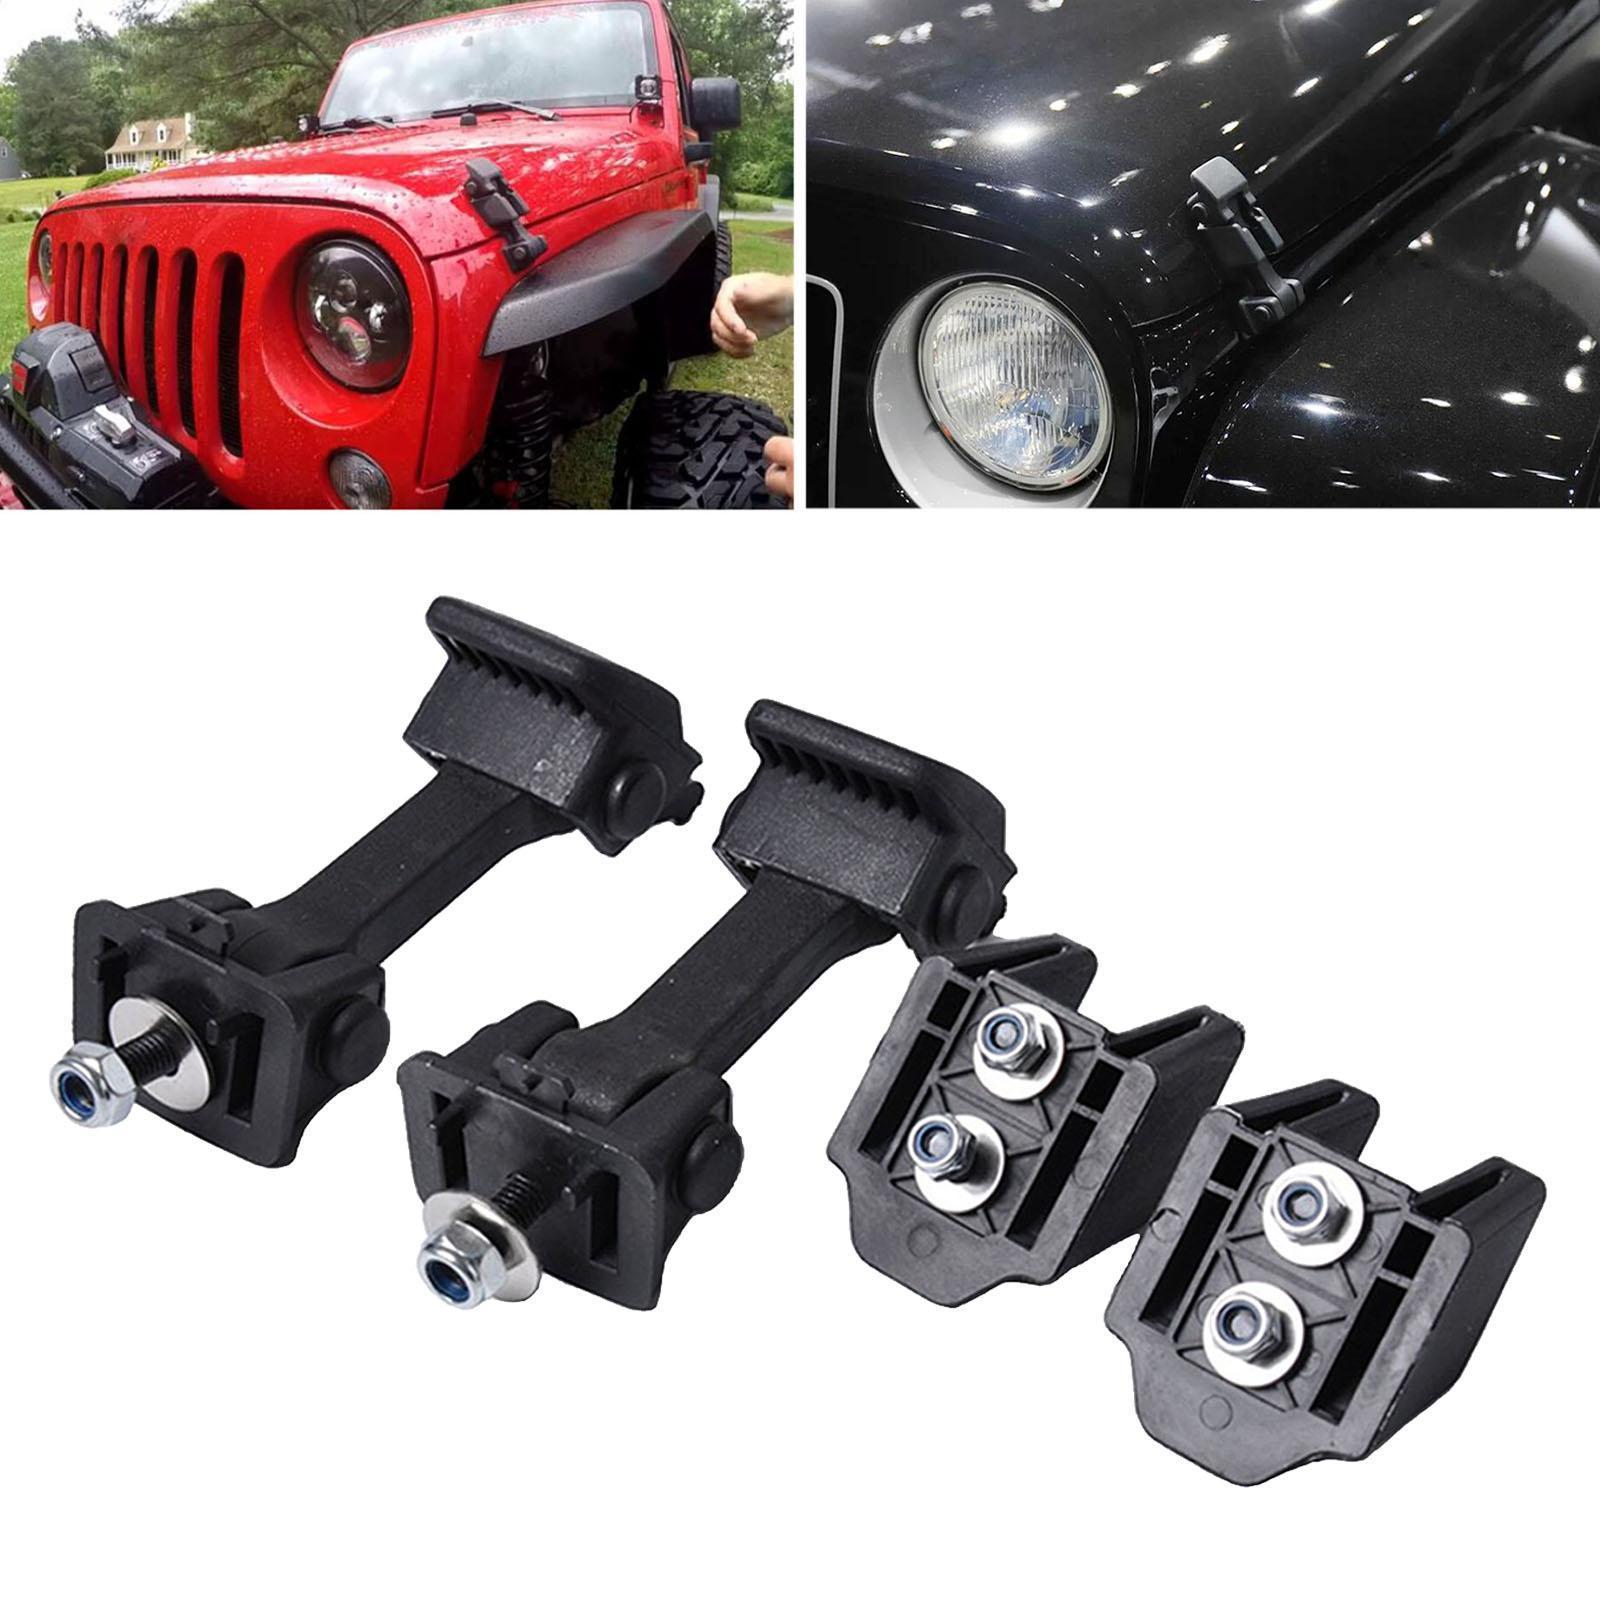 Hood Latches Catch Release Kit Locking Hood for Jeep Accessories Parts